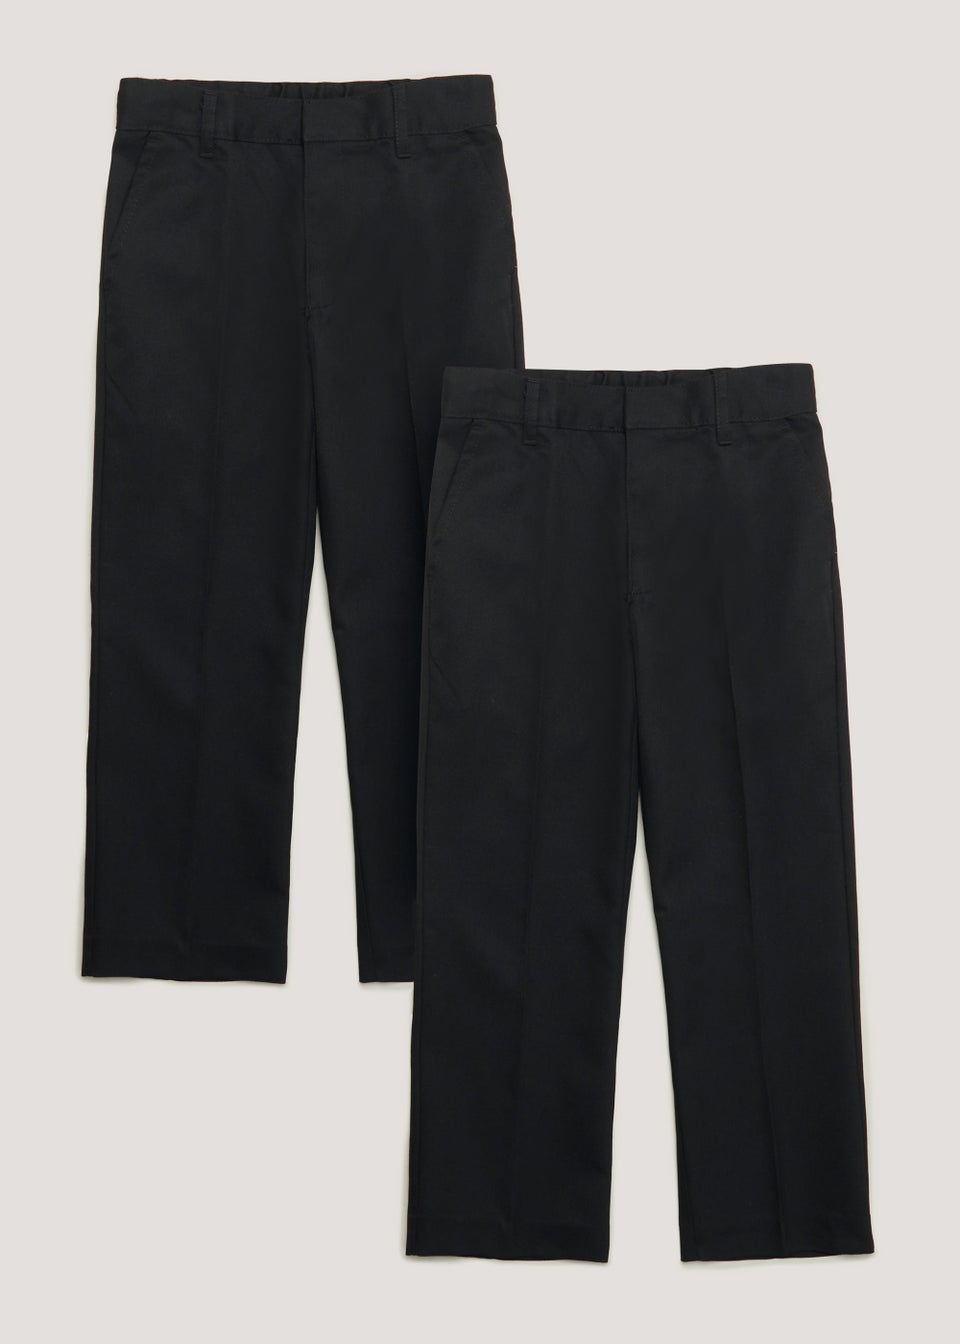 Boys 2 Pack Black Classic Fit School Trousers (3-16yrs)